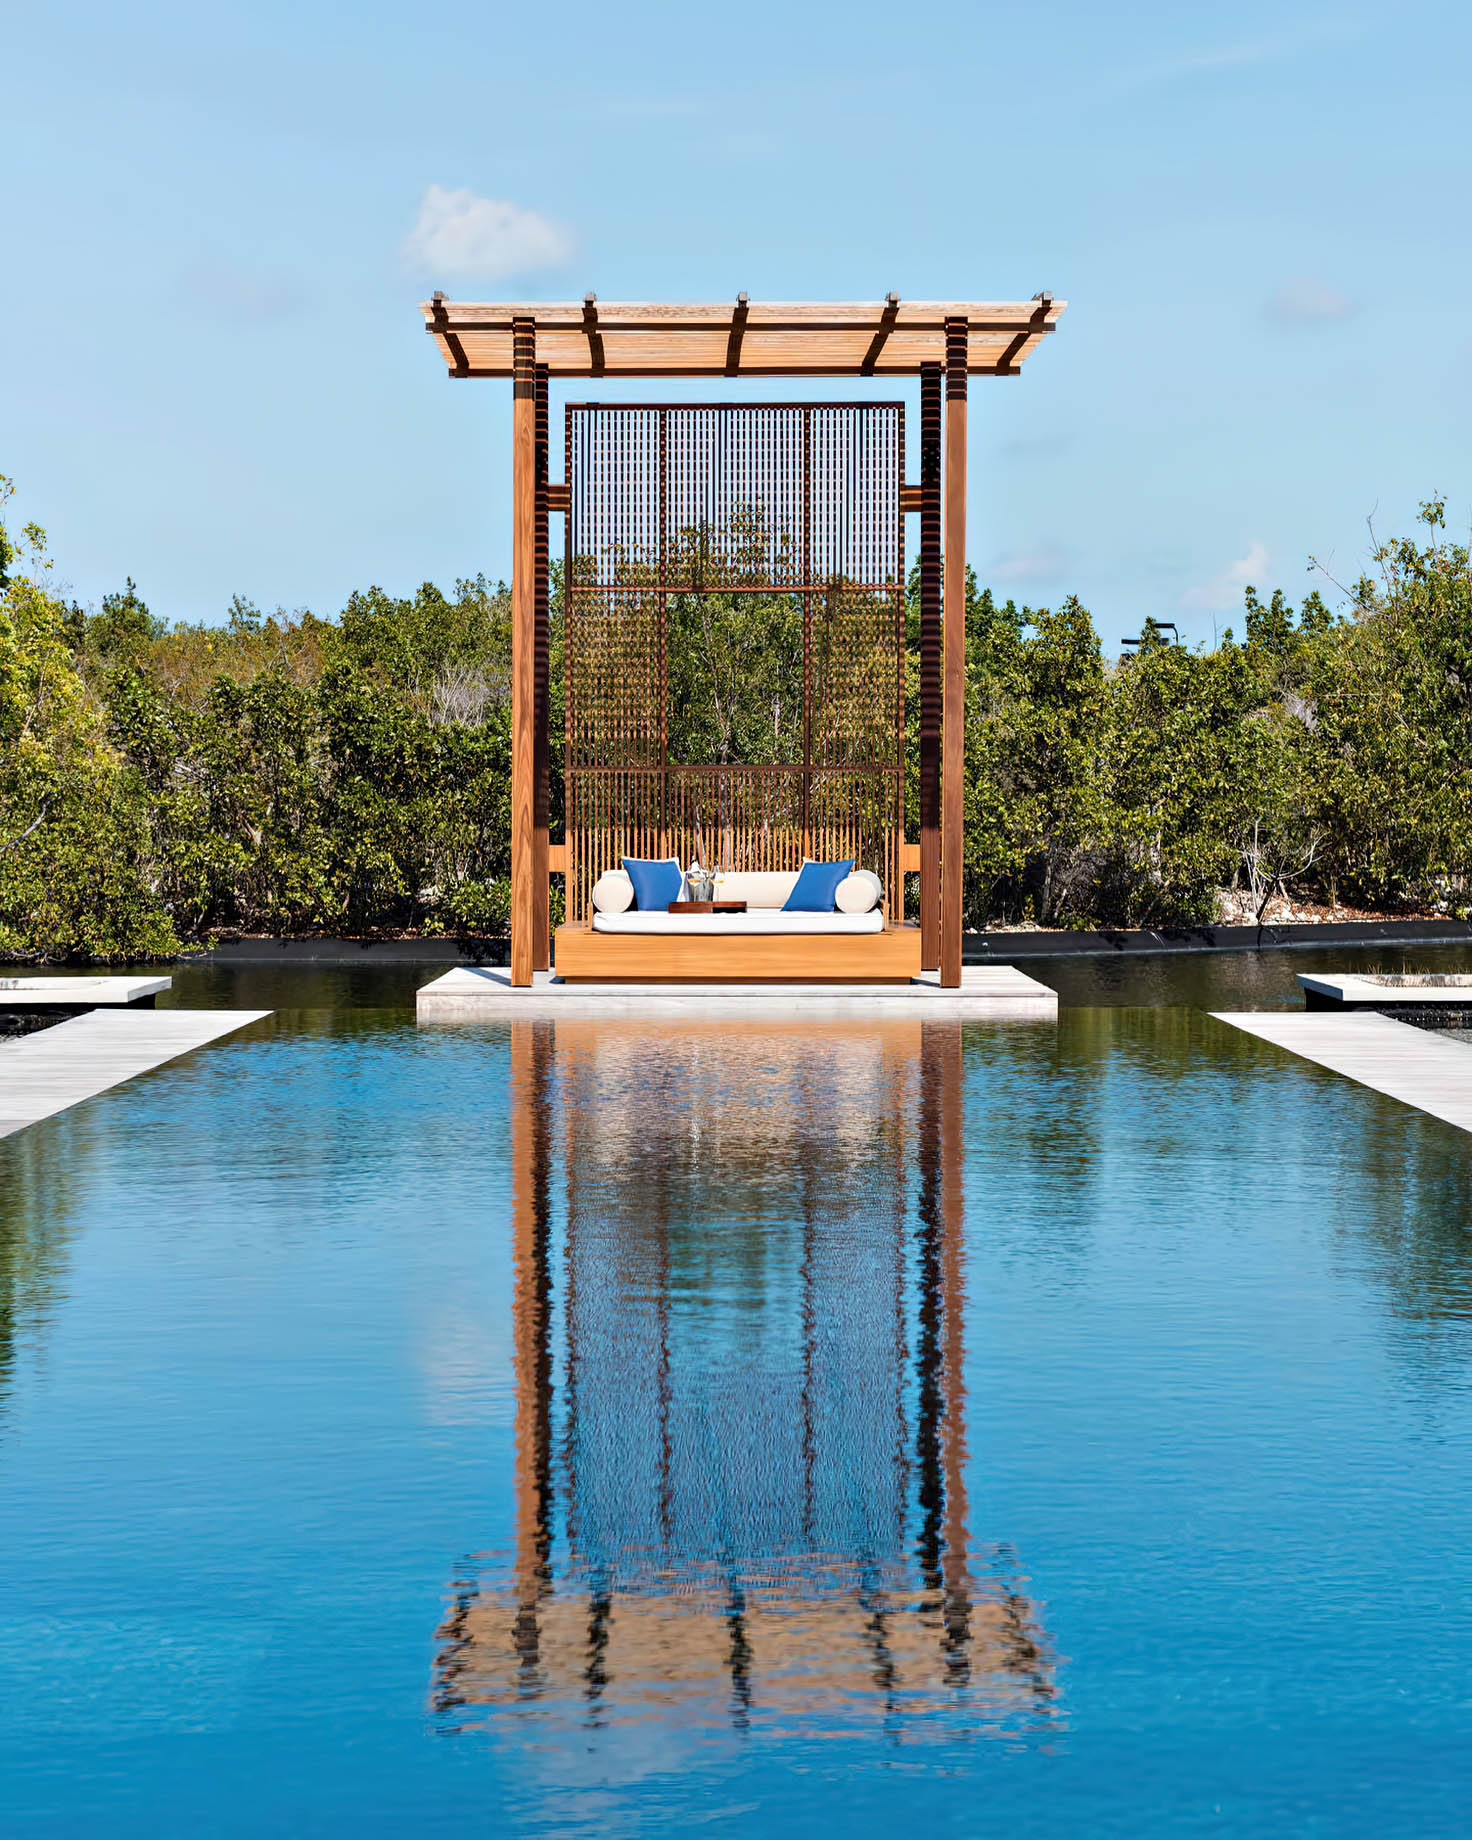 Amanyara Resort – Providenciales, Turks and Caicos Islands – A Place of Peace